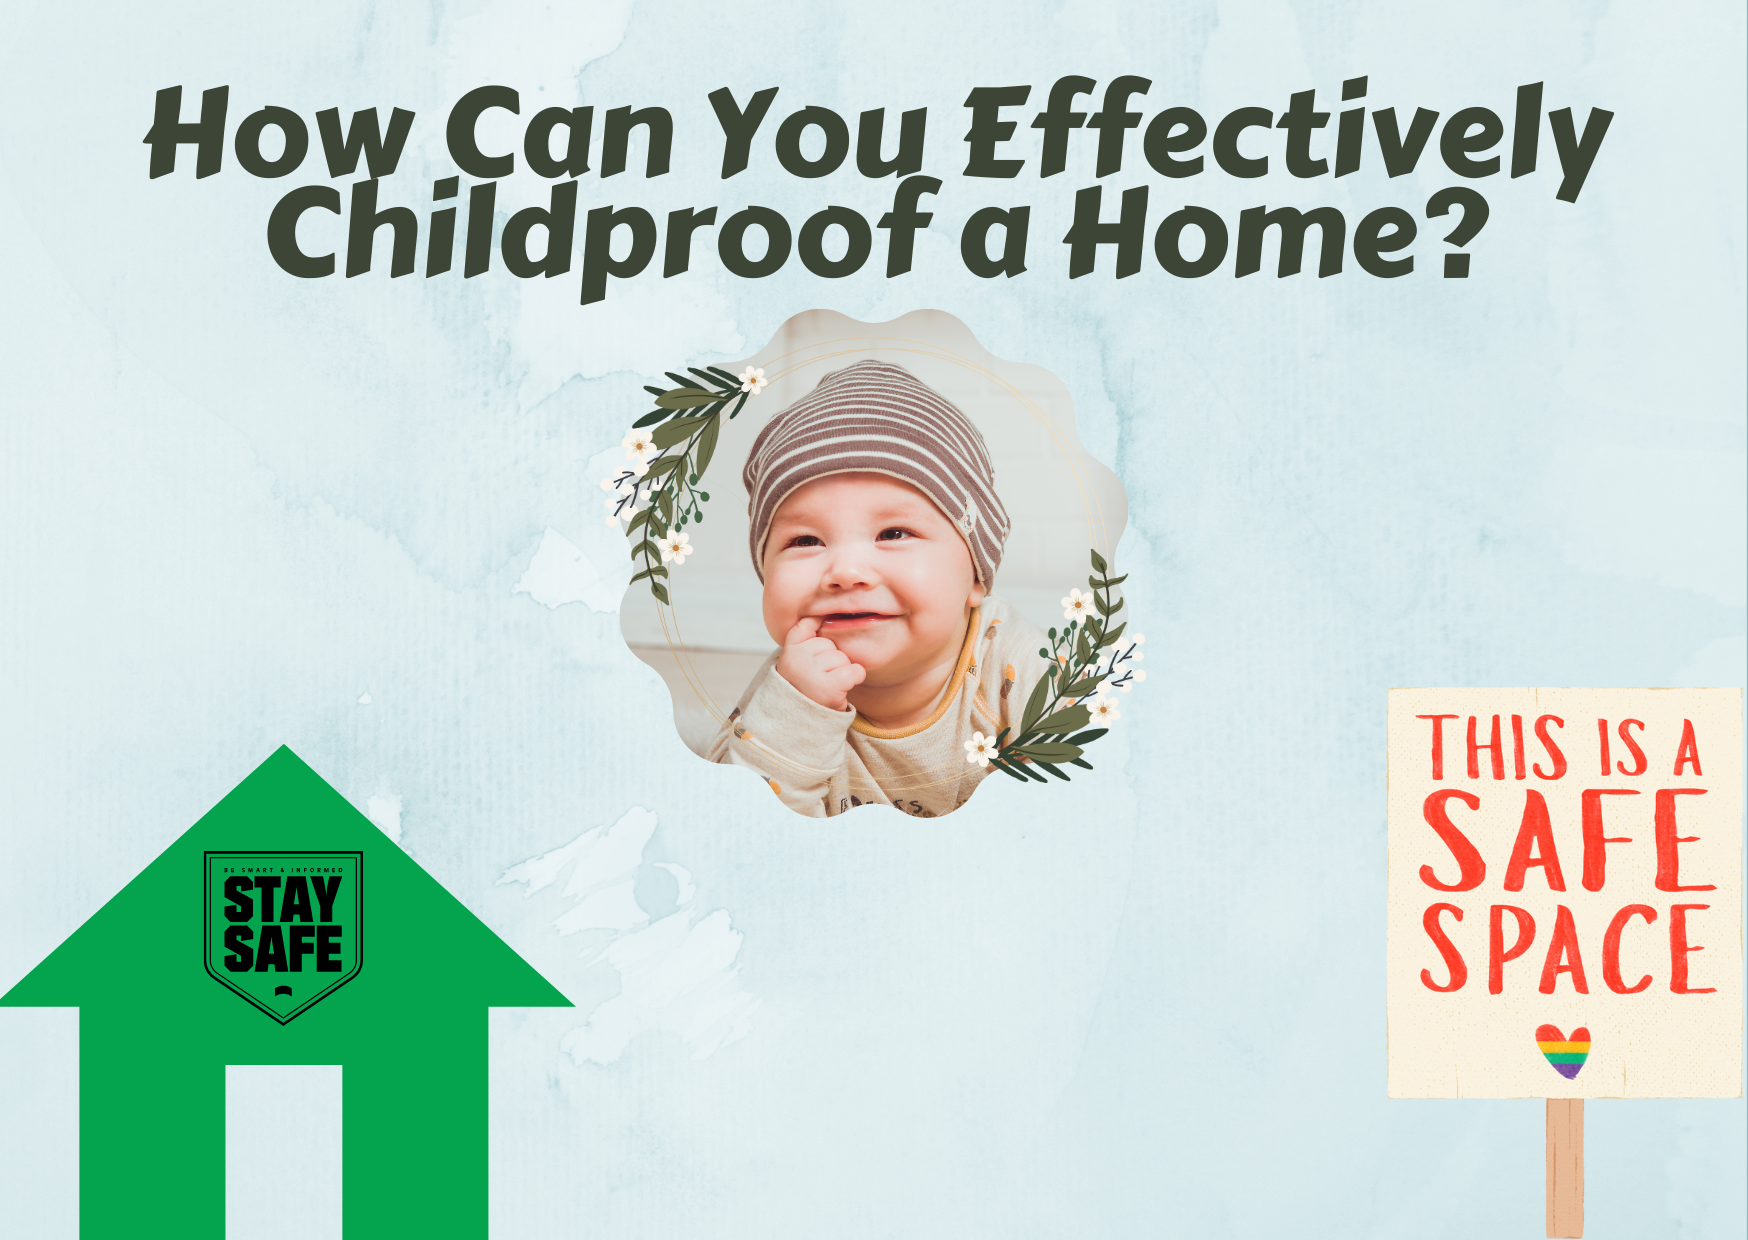 How Can You Effectively Childproof a Home?